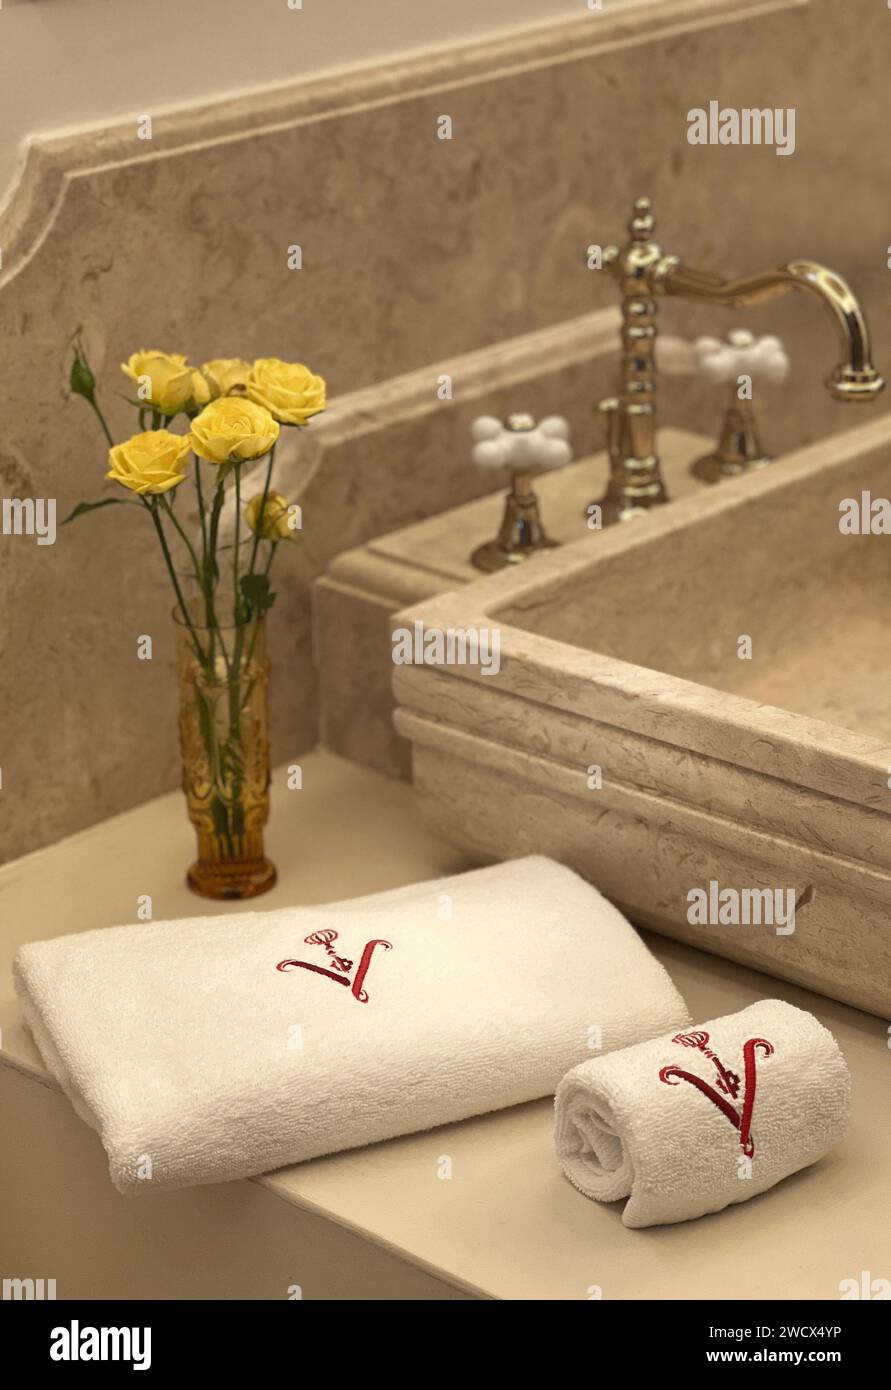 Portugal, Alentejo, Melides, towel decorated with the Vermelho logo, the boutique hotel of shoe designer Christian Louboutin, in a bathroom of a suite Stock Photo